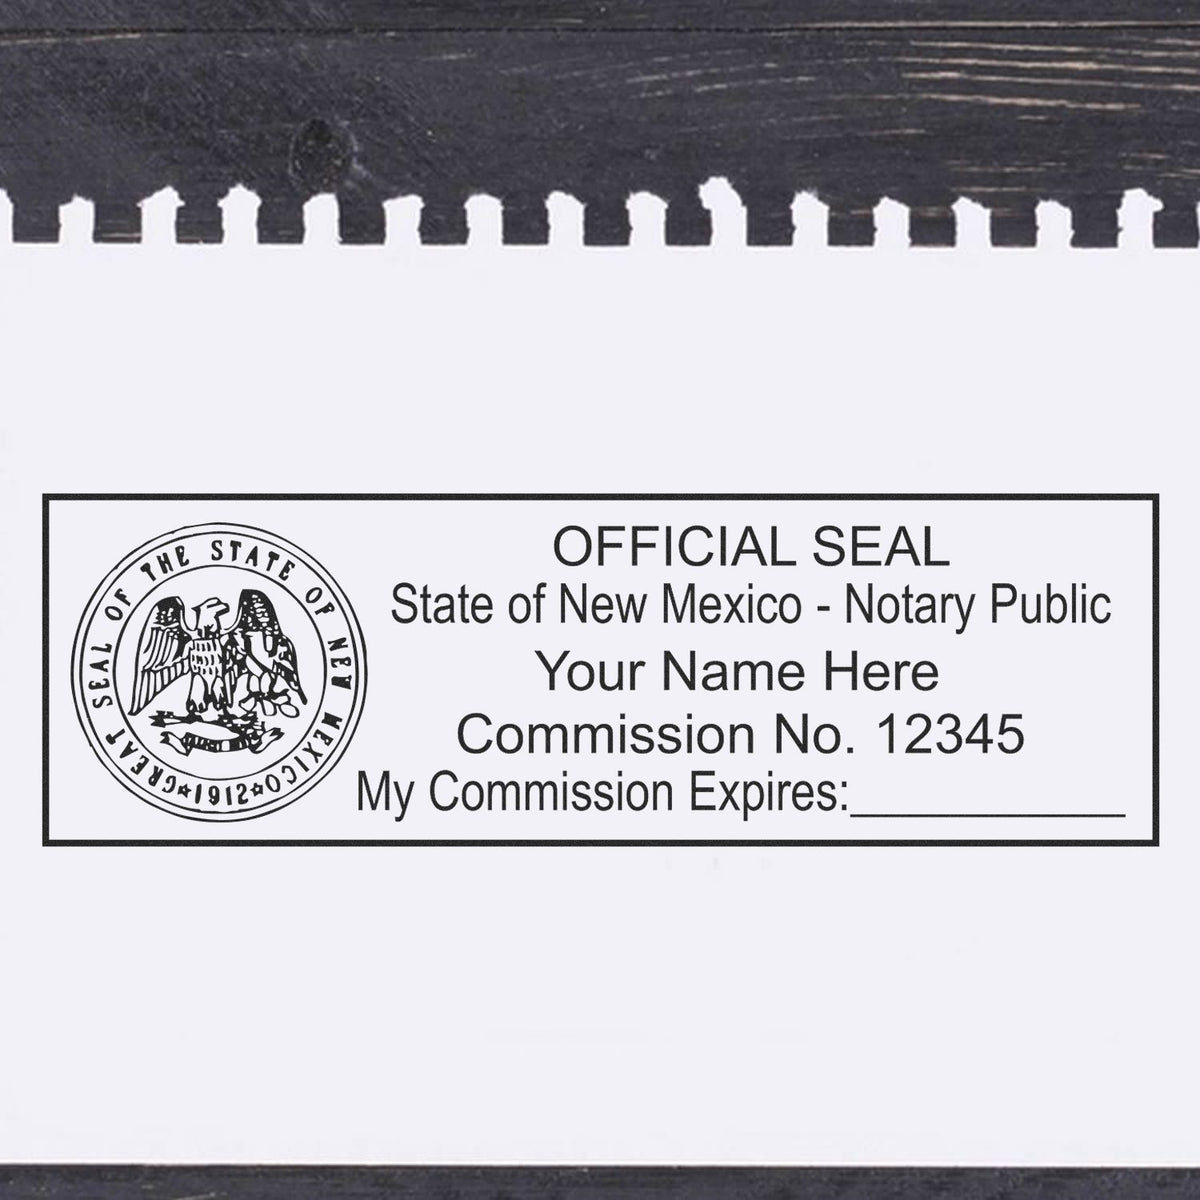 The Slim Pre-Inked State Seal Notary Stamp for New Mexico stamp impression comes to life with a crisp, detailed photo on paper - showcasing true professional quality.